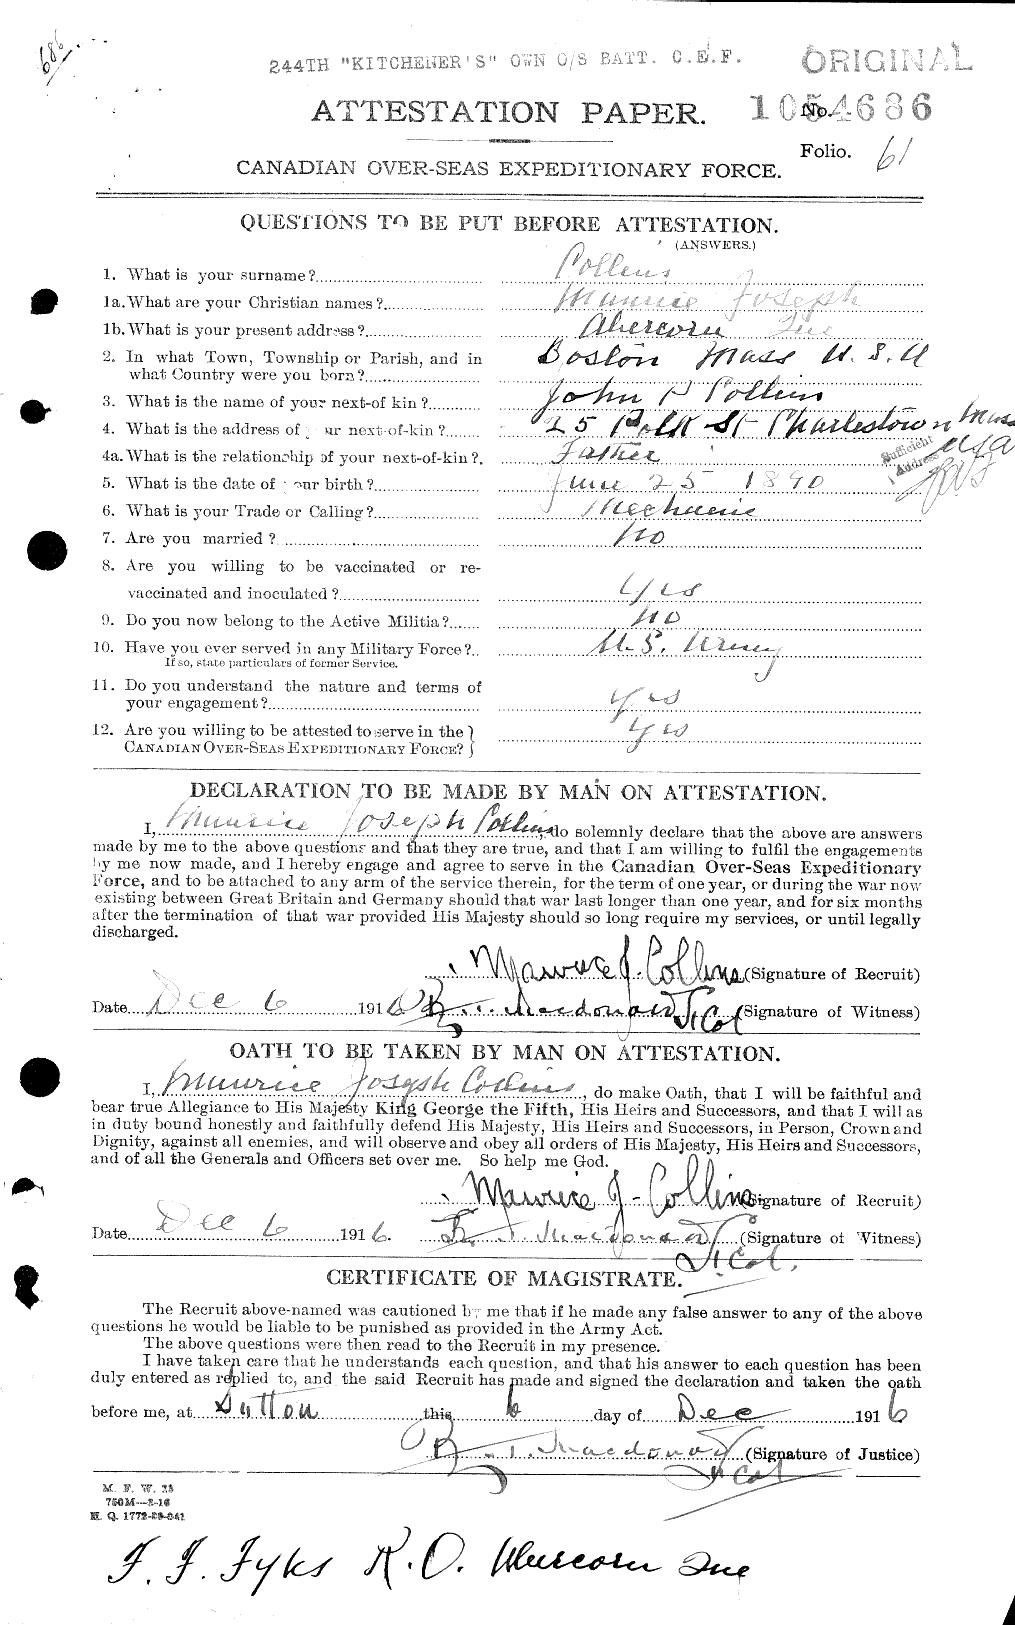 Personnel Records of the First World War - CEF 034462a